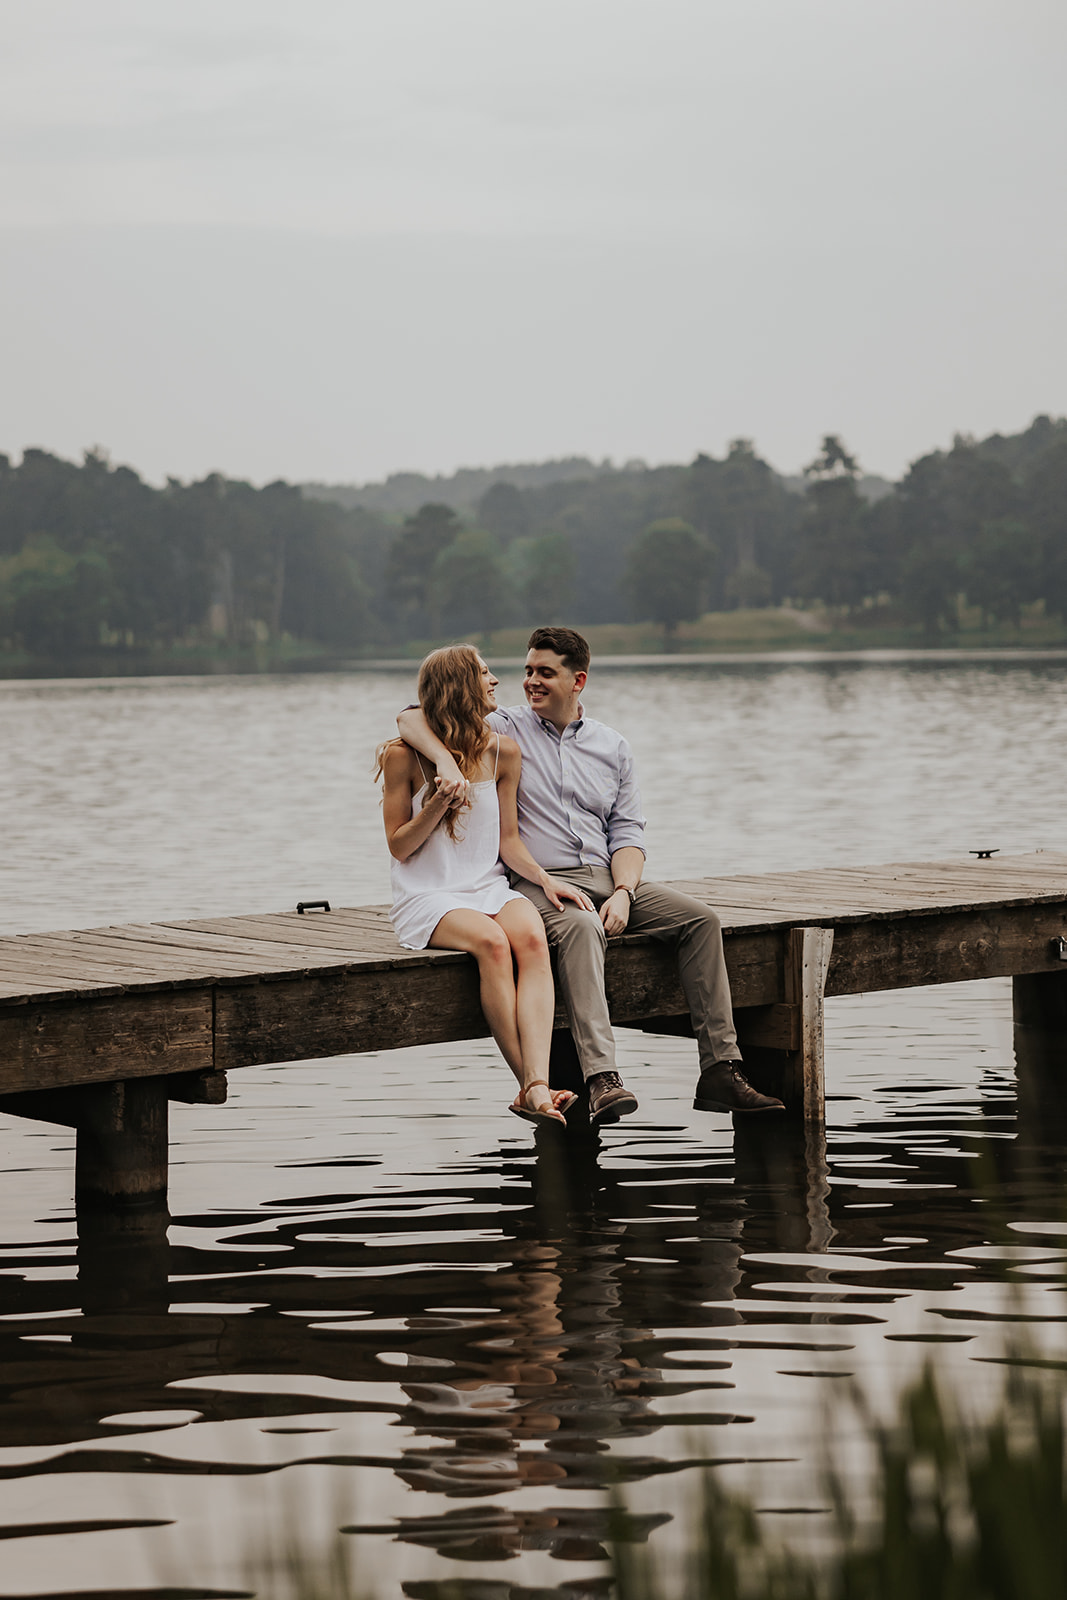 Beautiful couple sit together on a Lake Acworth dock during their engagement photoshoot. Such a cute couples photo idea